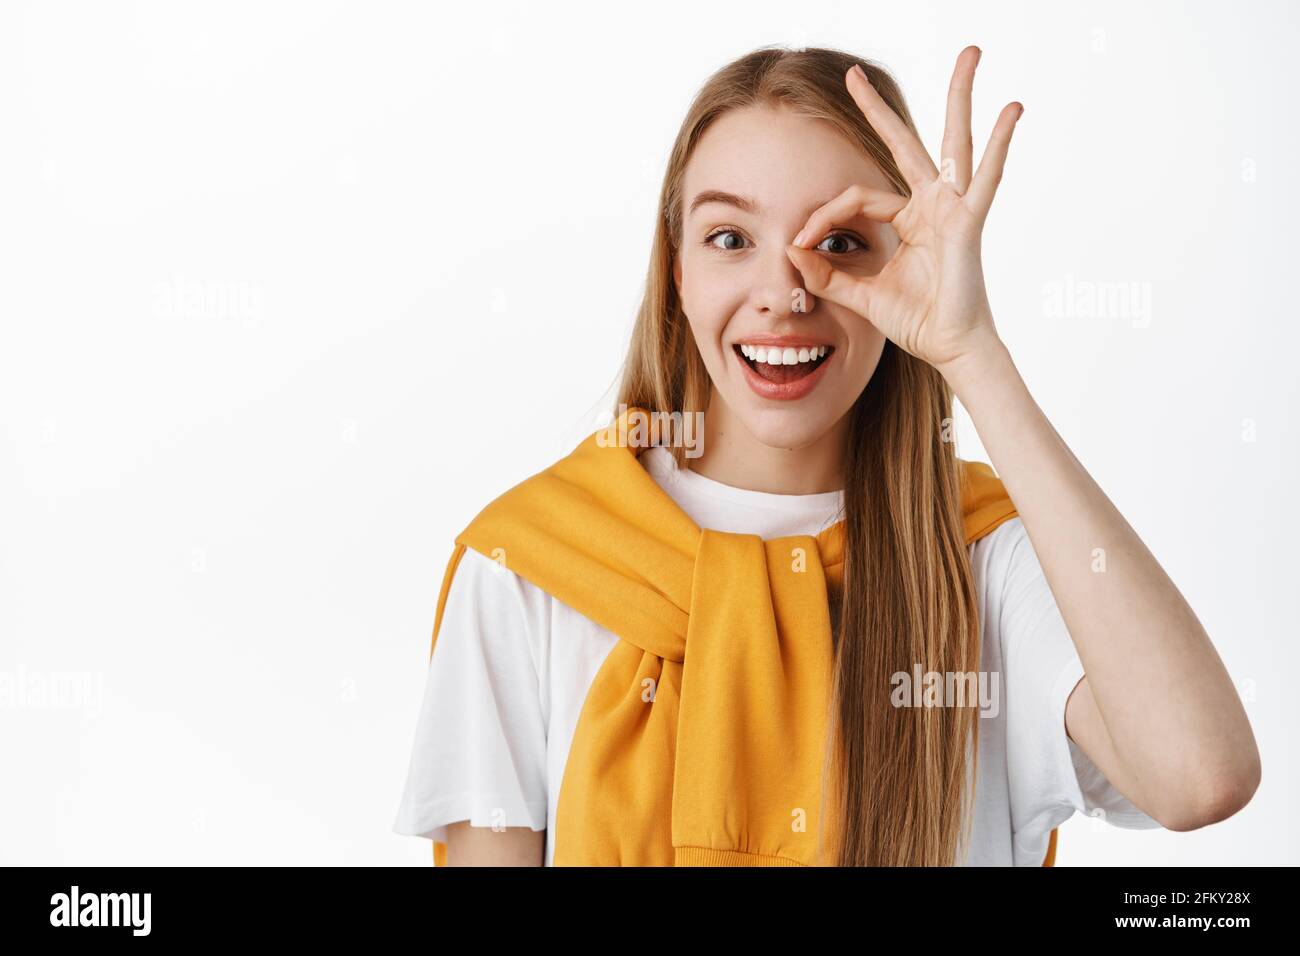 blob covering face and showing ok hand sign